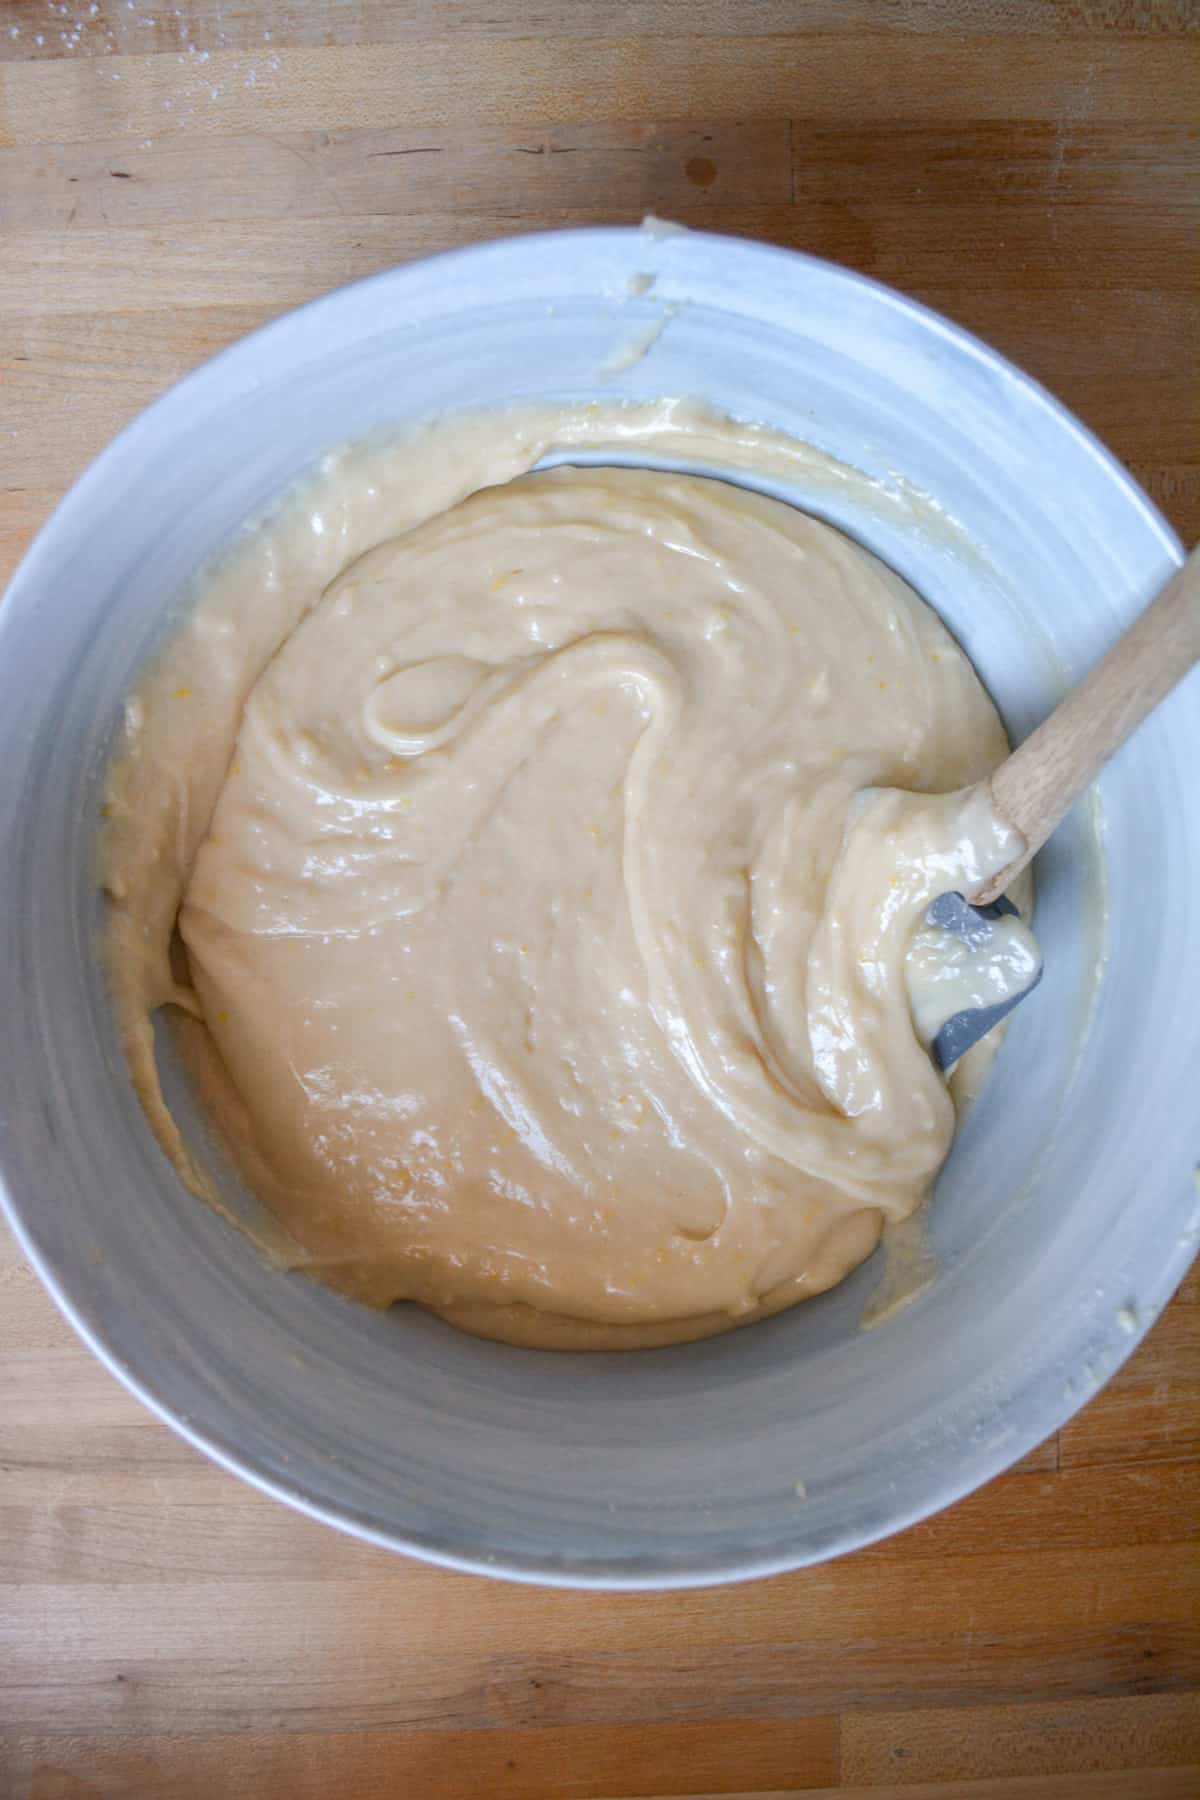 Dry ingredients mixed into the bowl to form the batter with a spatula off to the right.